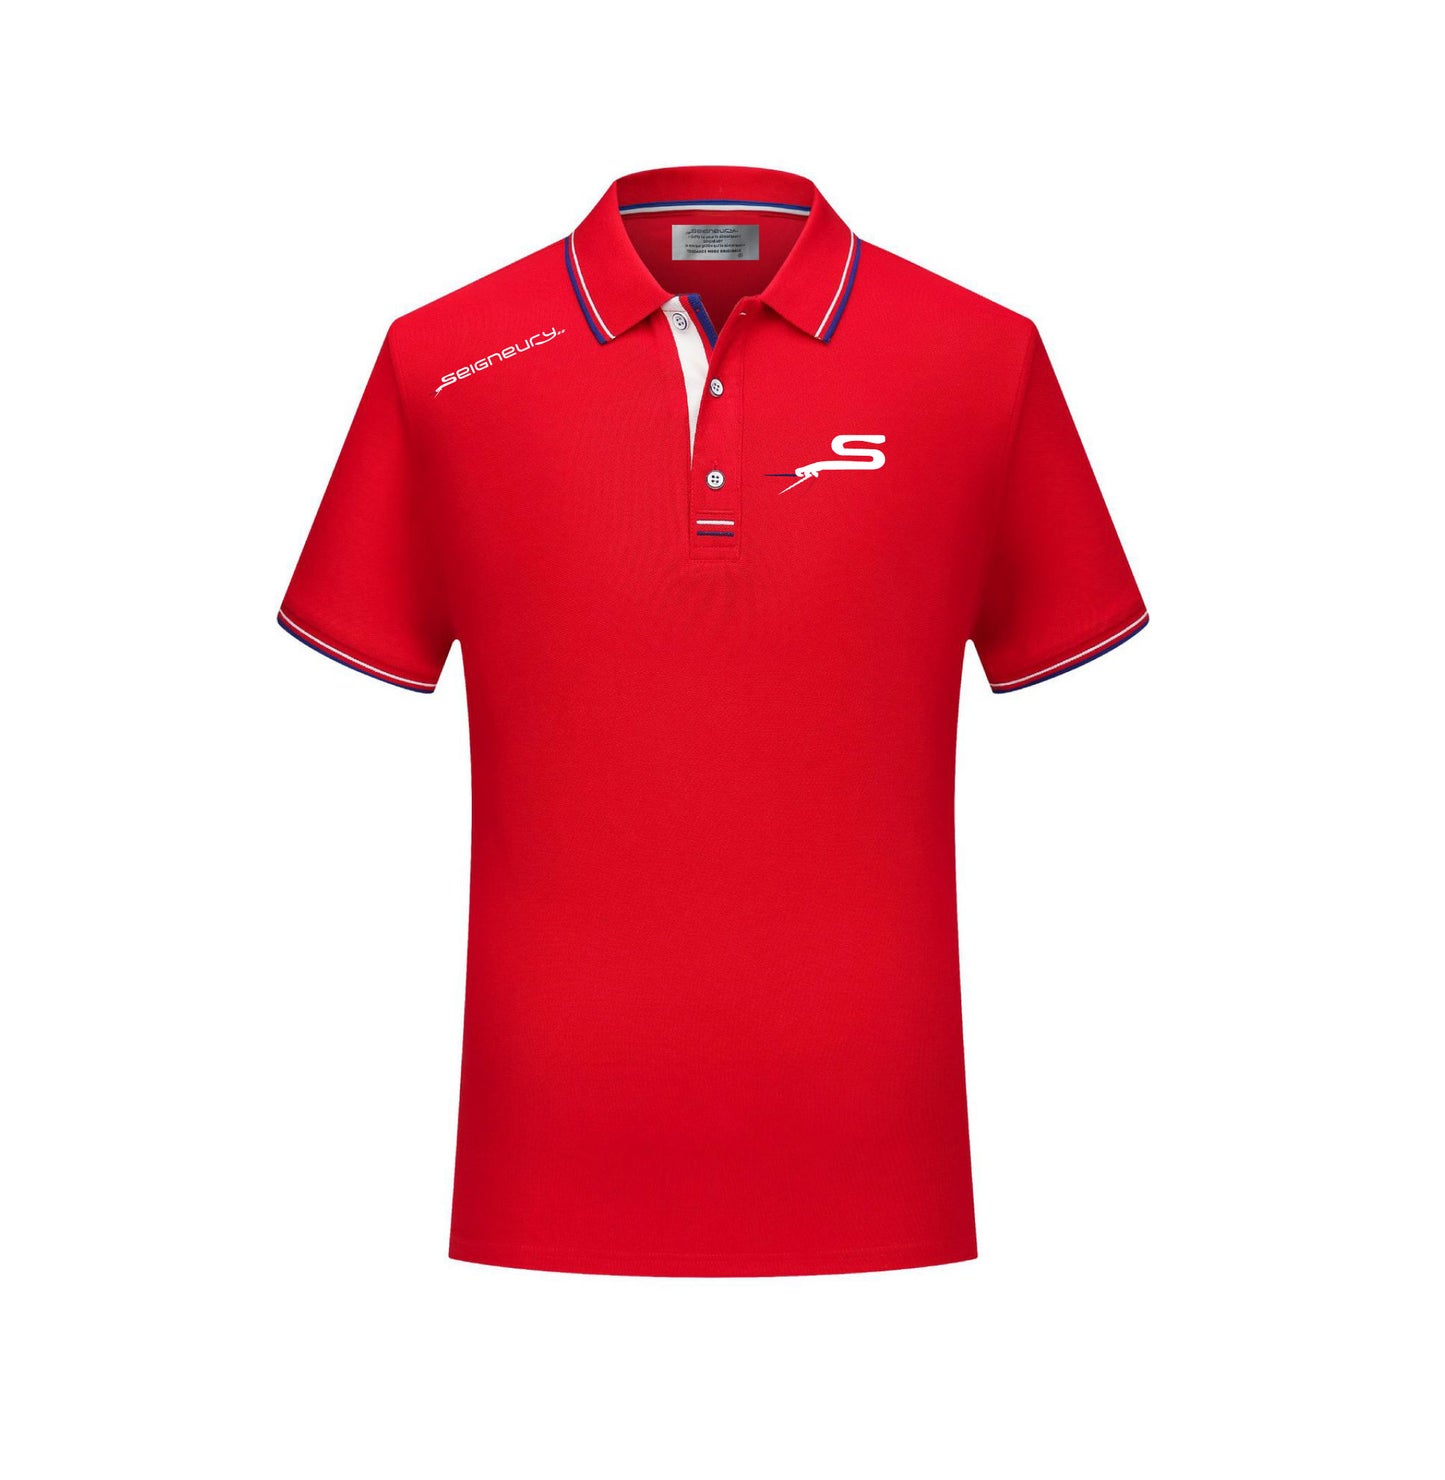 Polo golf tennis manches courtes logo broder gamme ARGENT olympe